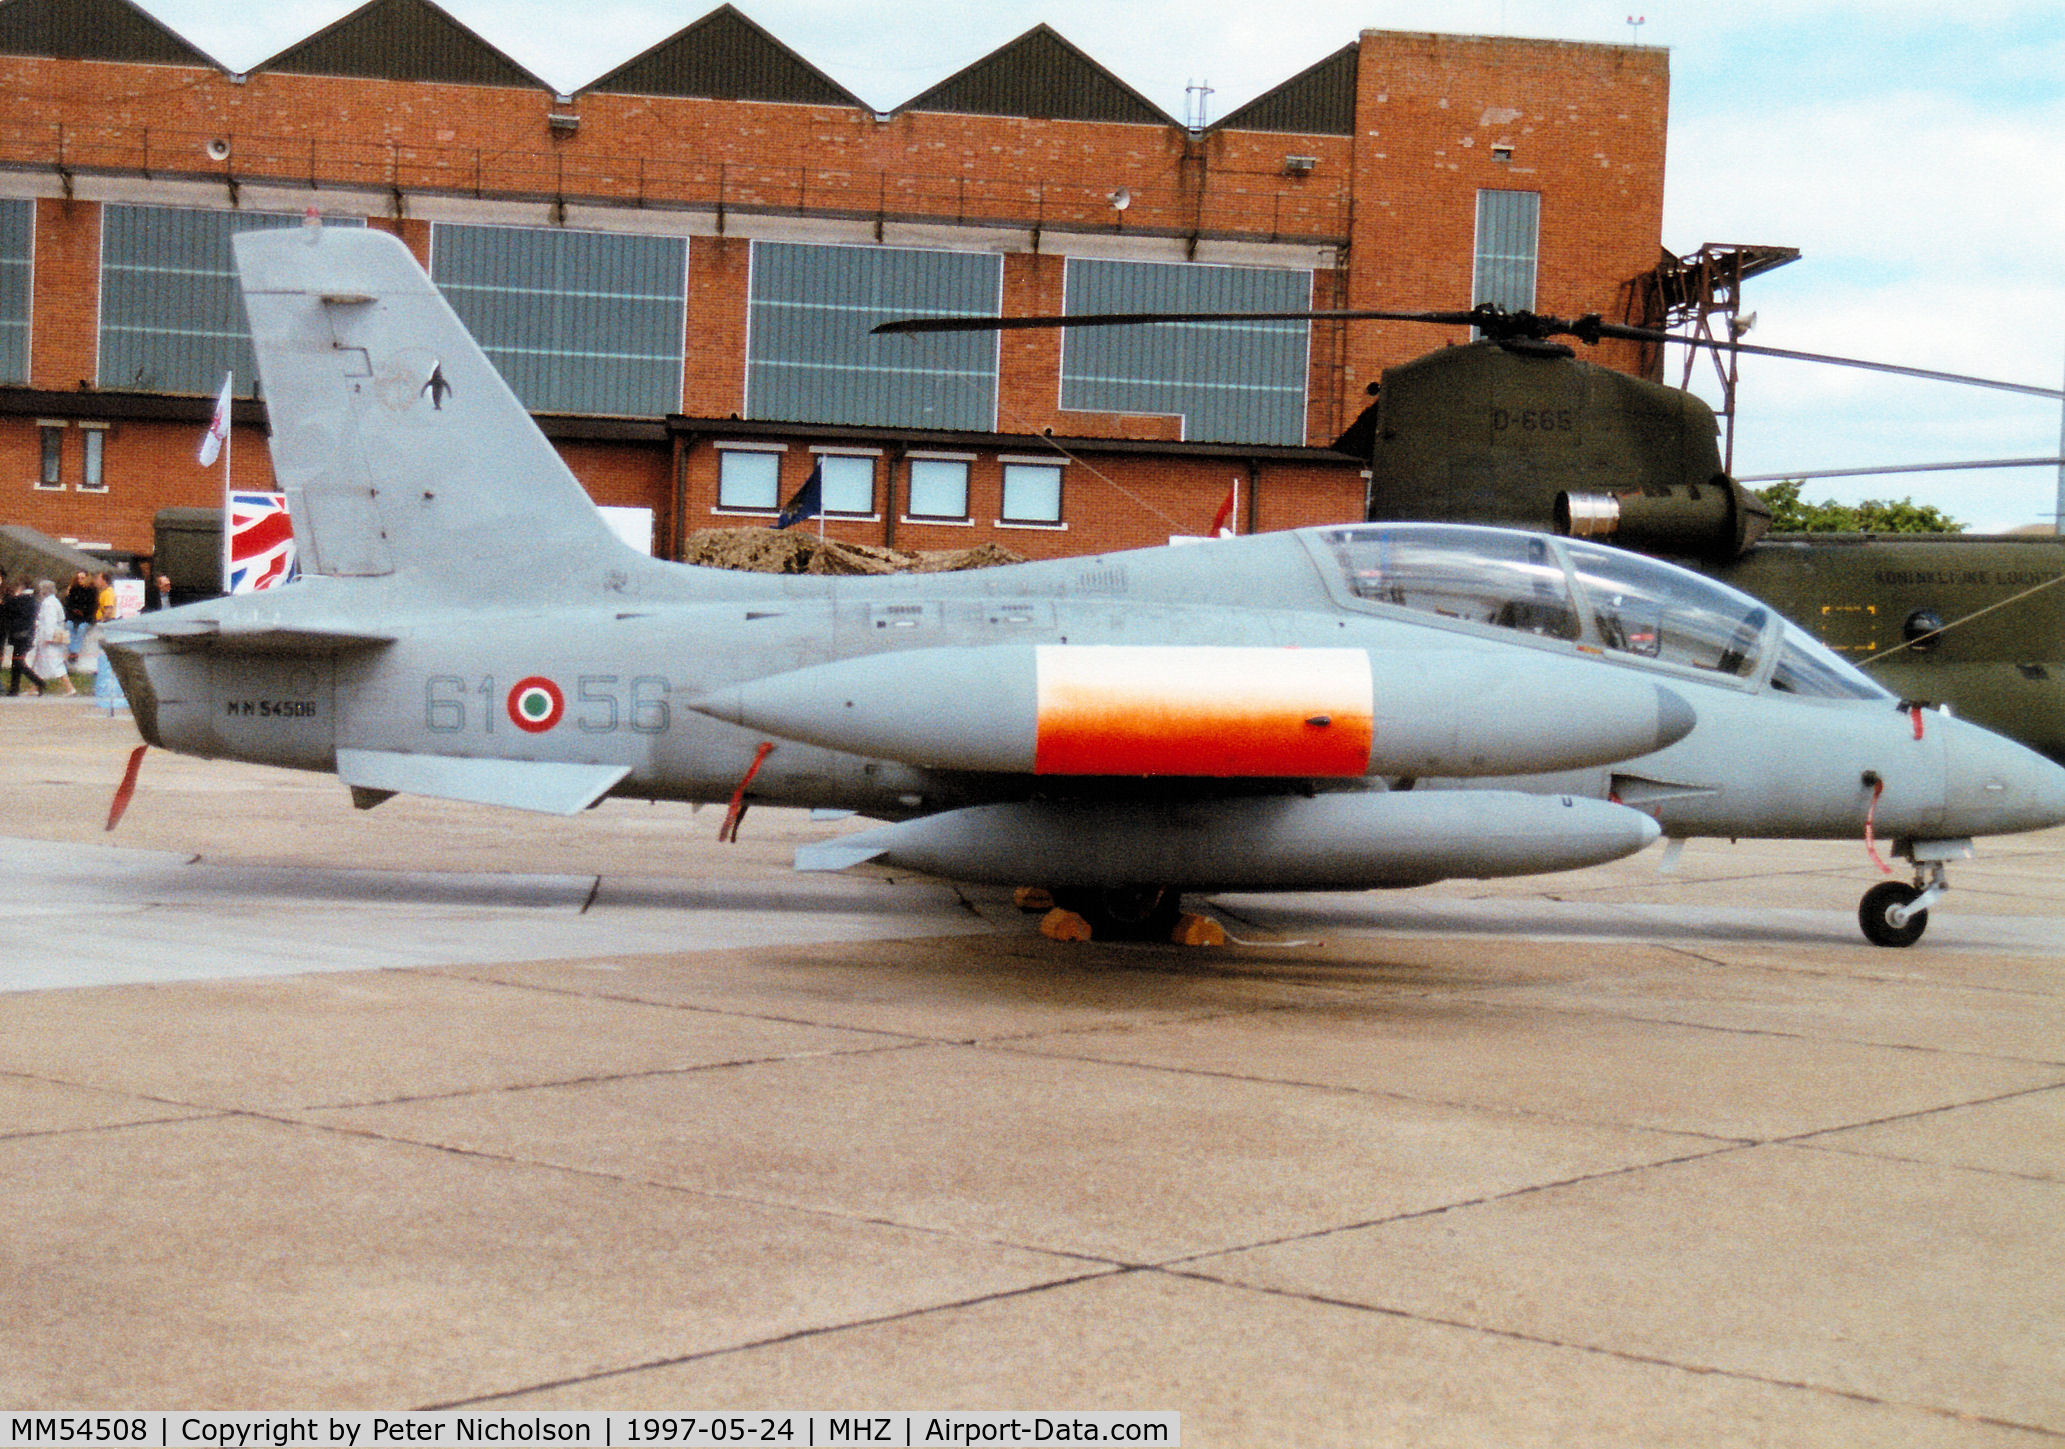 MM54508, Aermacchi MB-339A C/N 6722/117/AA056, MB-339A, callsign India 4550, of the Italian Air Force's 61 Stormo on display at the 1997 RAF Mildenhall Air Fete.